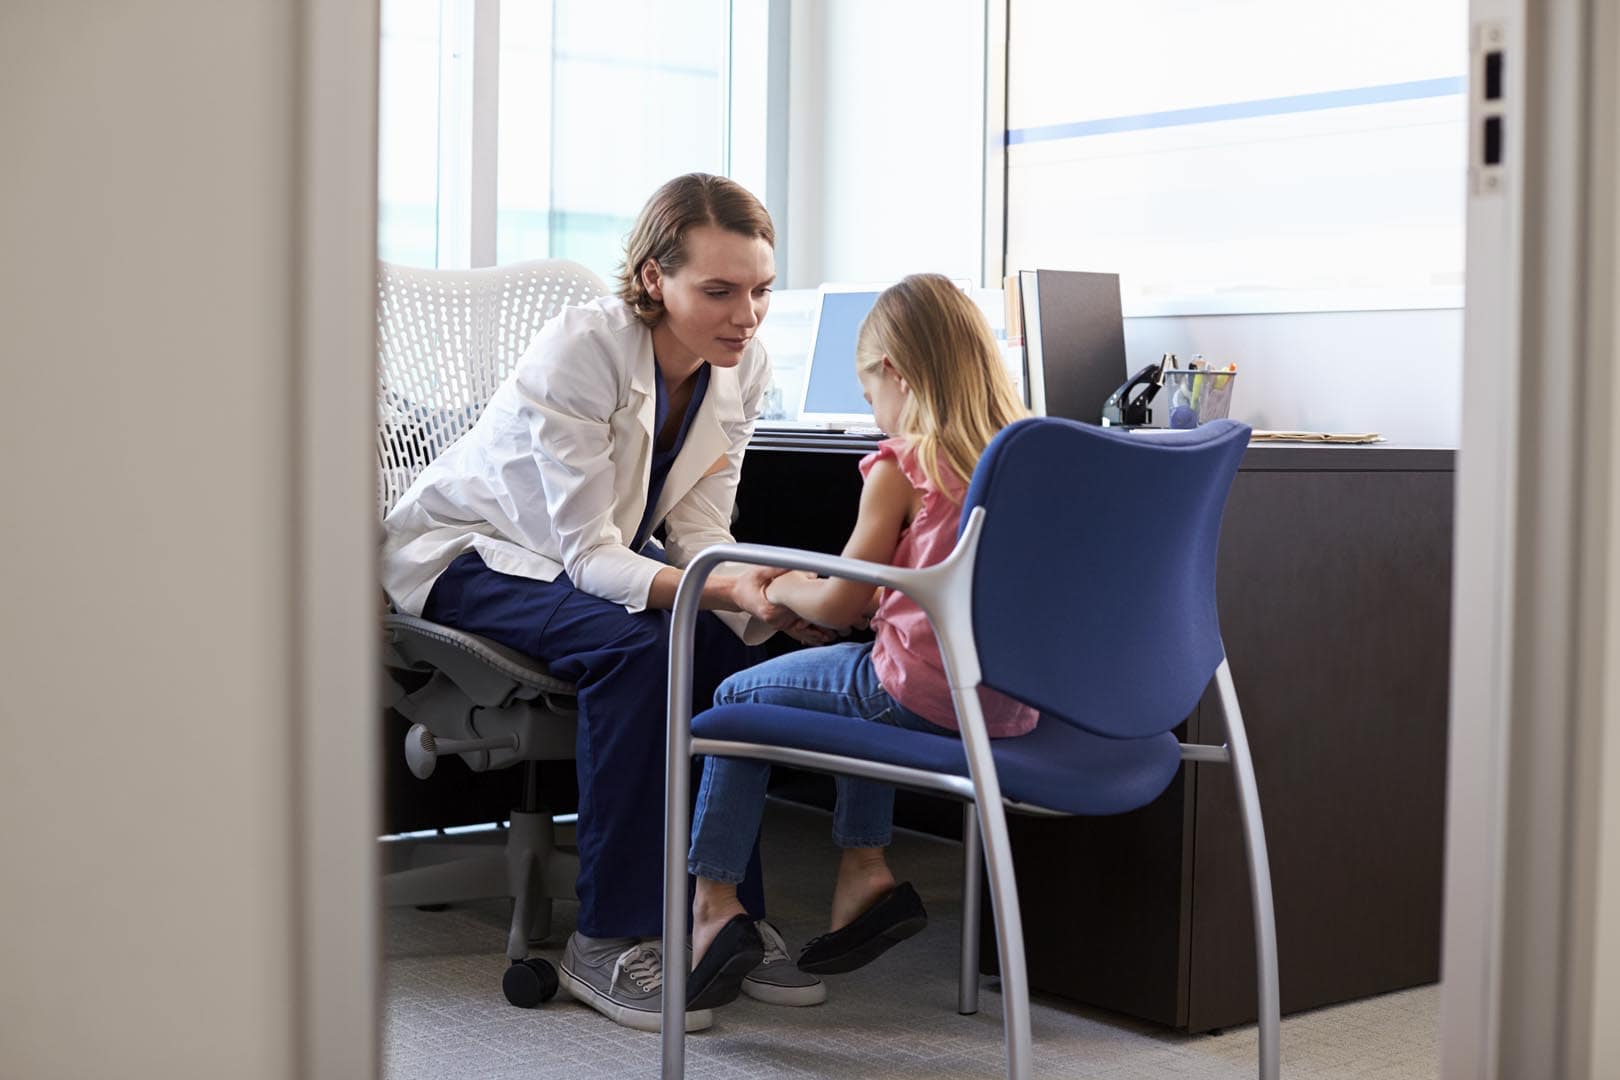 What Is A Child Psychiatrist?